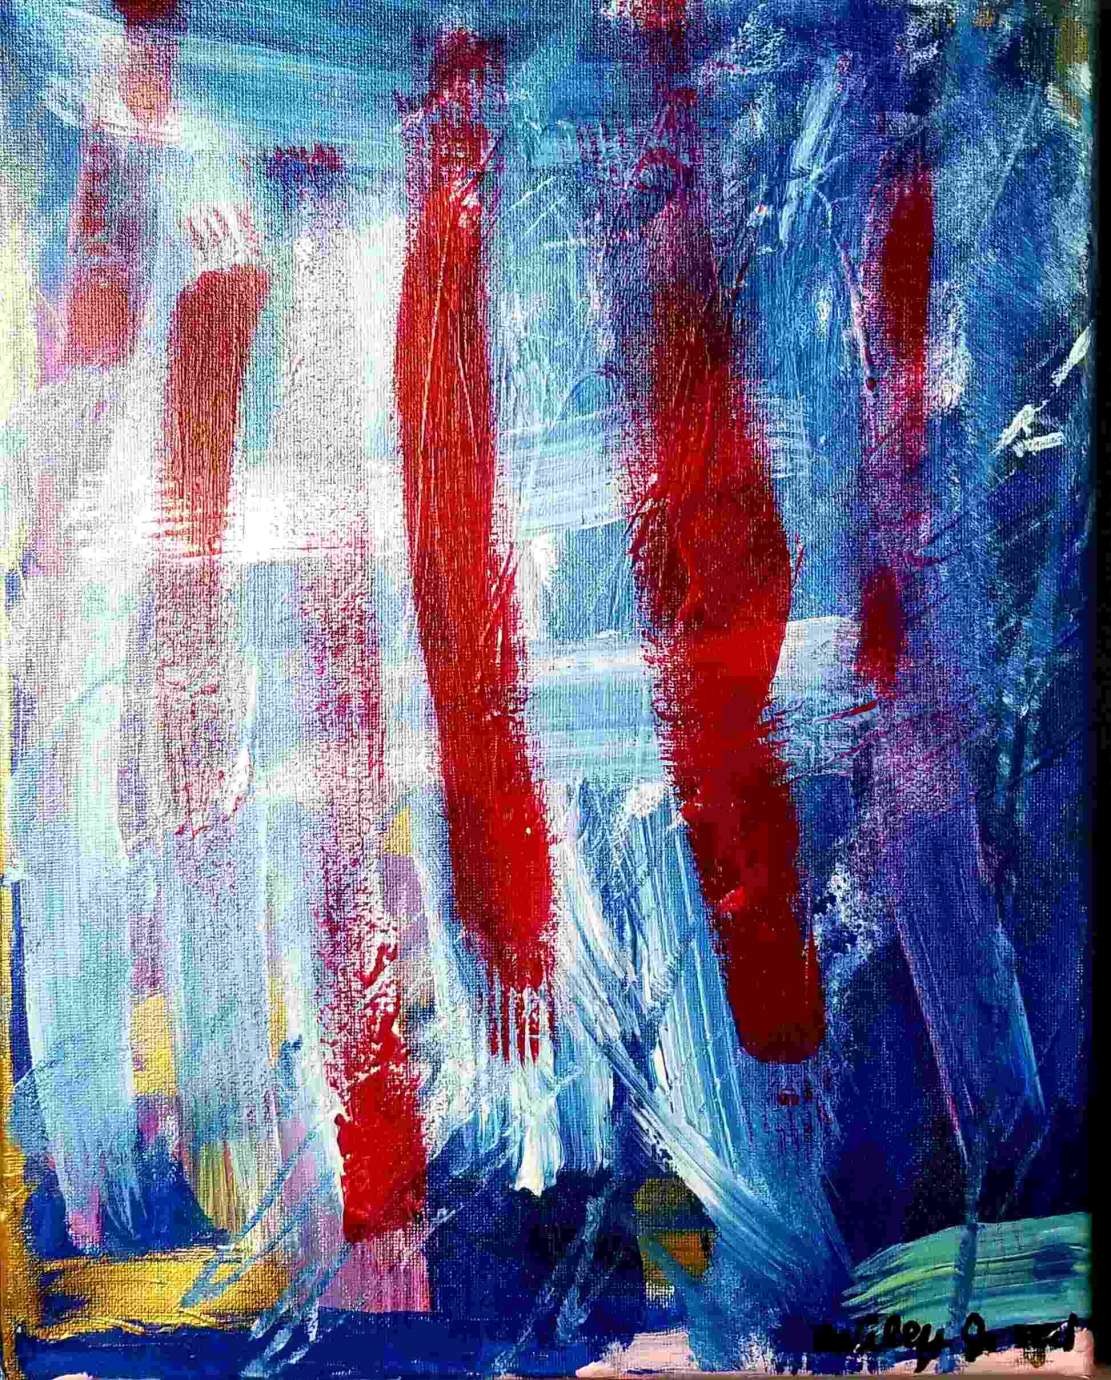 Brush strokes mostly up and down in blue, white, and red